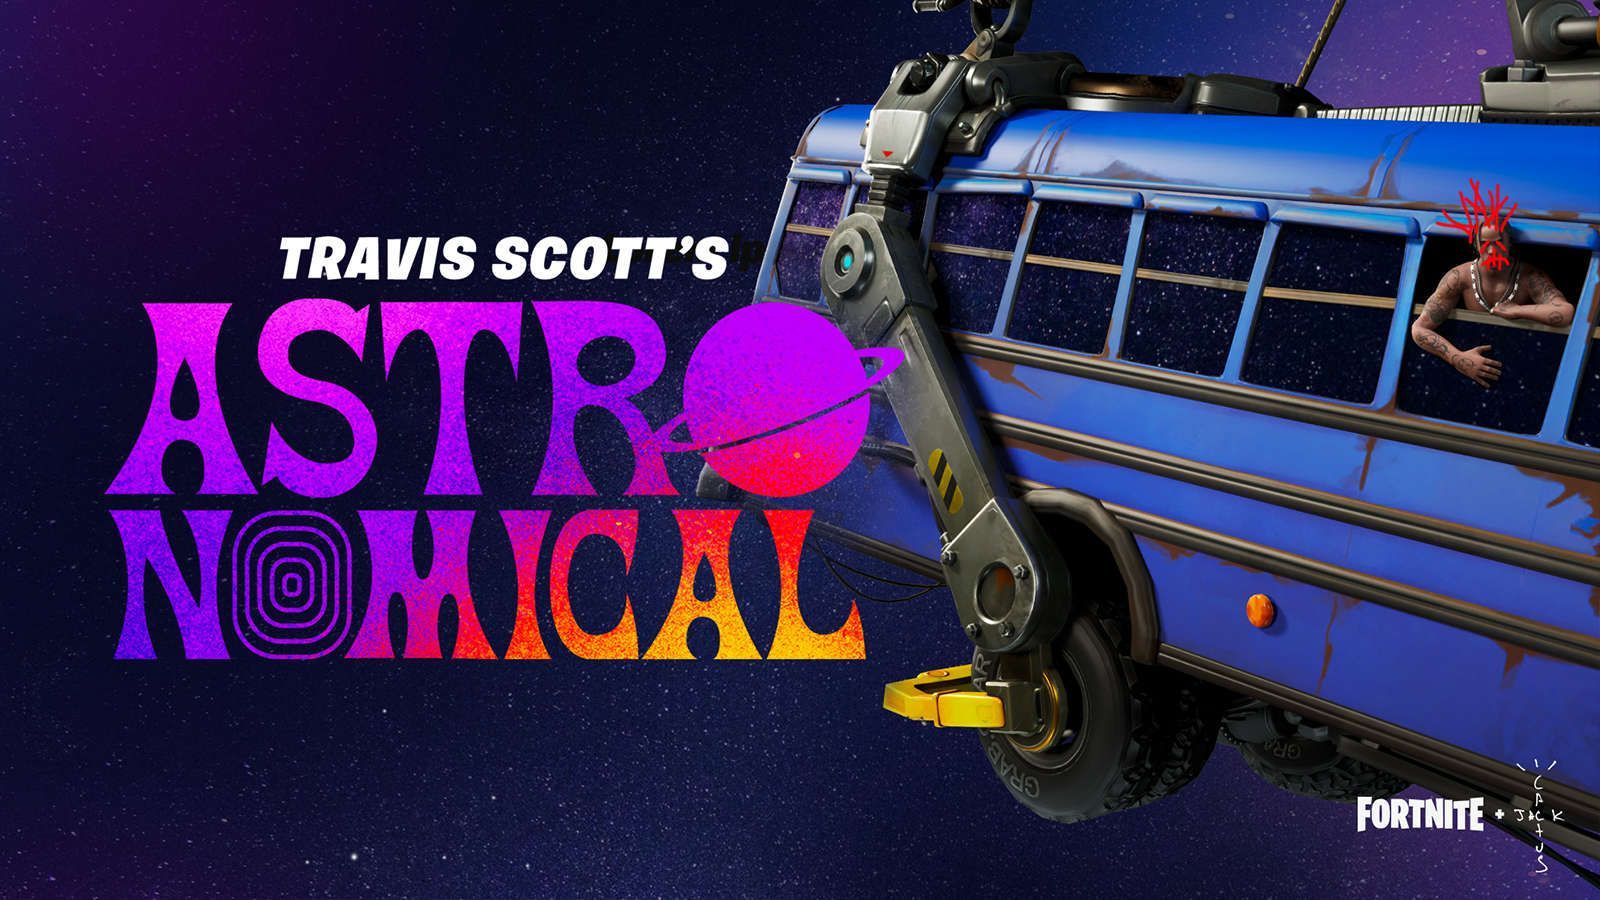 How to watch Fortnite Travis Scott's Astronomical concerts: streams, rewards, more